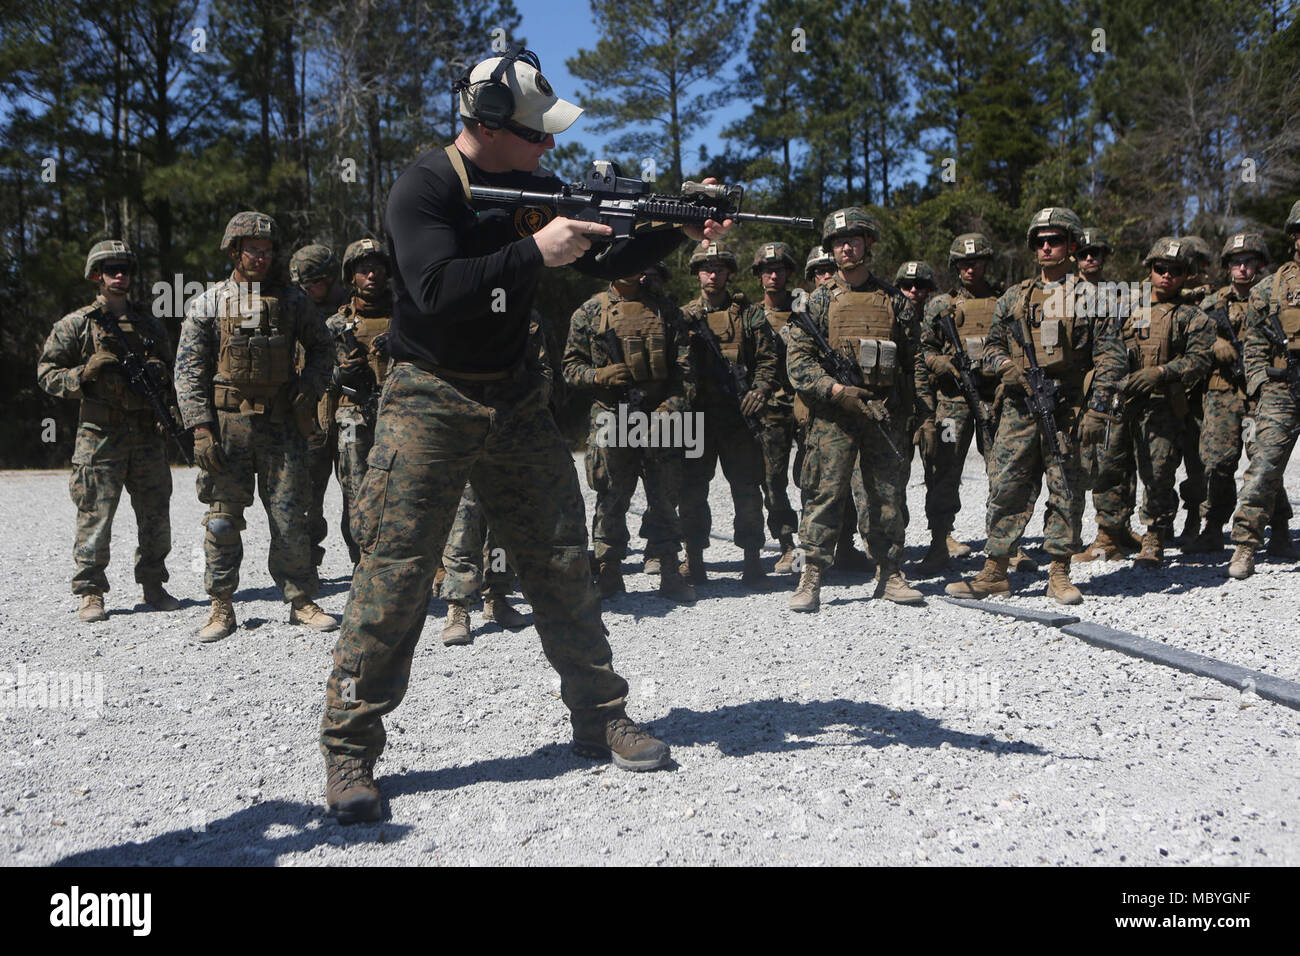 A U.S. Marine with Expeditionary Operations Training Group, demonstrates weapon handling during a range as part of a close quarter’s tactics enabler’s course at Camp Lejeune, N.C., March 23, 2018. The course provided Marines the opportunity to improve fire and movement tactics as a security platoon element. Marines participated in the training in preparation for their upcoming deployment with 22nd Marine Expeditionary Unit. Stock Photo